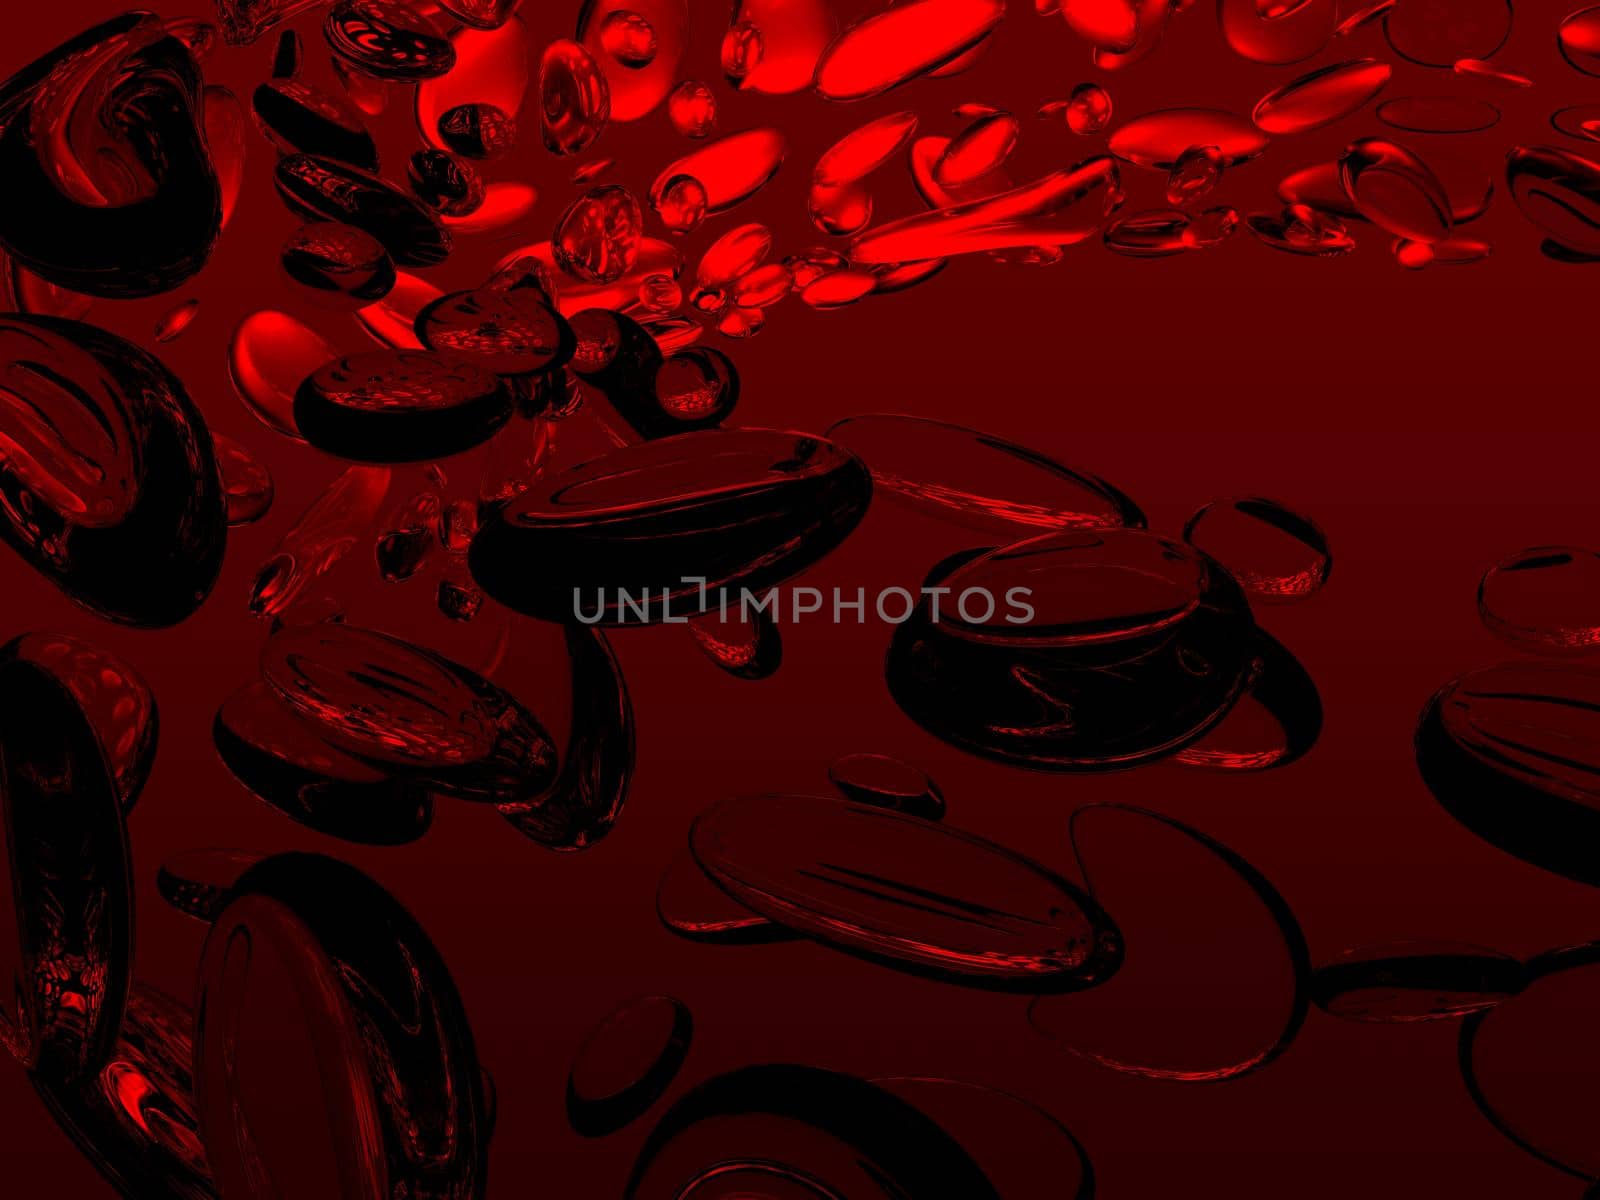 Water droplets on a red background by clusterx